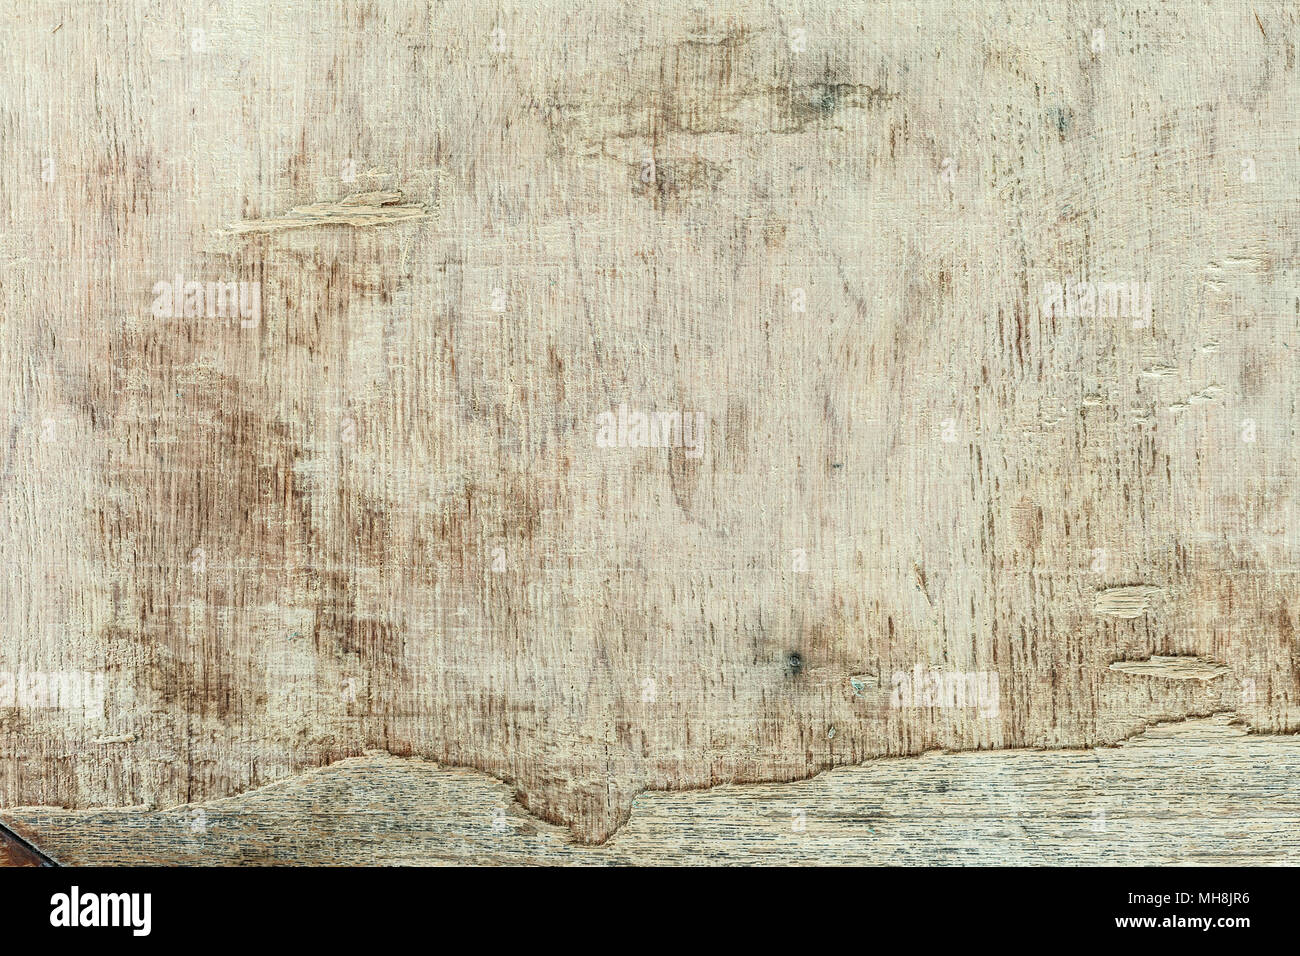 Old wood. Rustic pattern on white backdrop. Wood background texture, vintage board, rustic wood surface, rough tree. Stock Photo